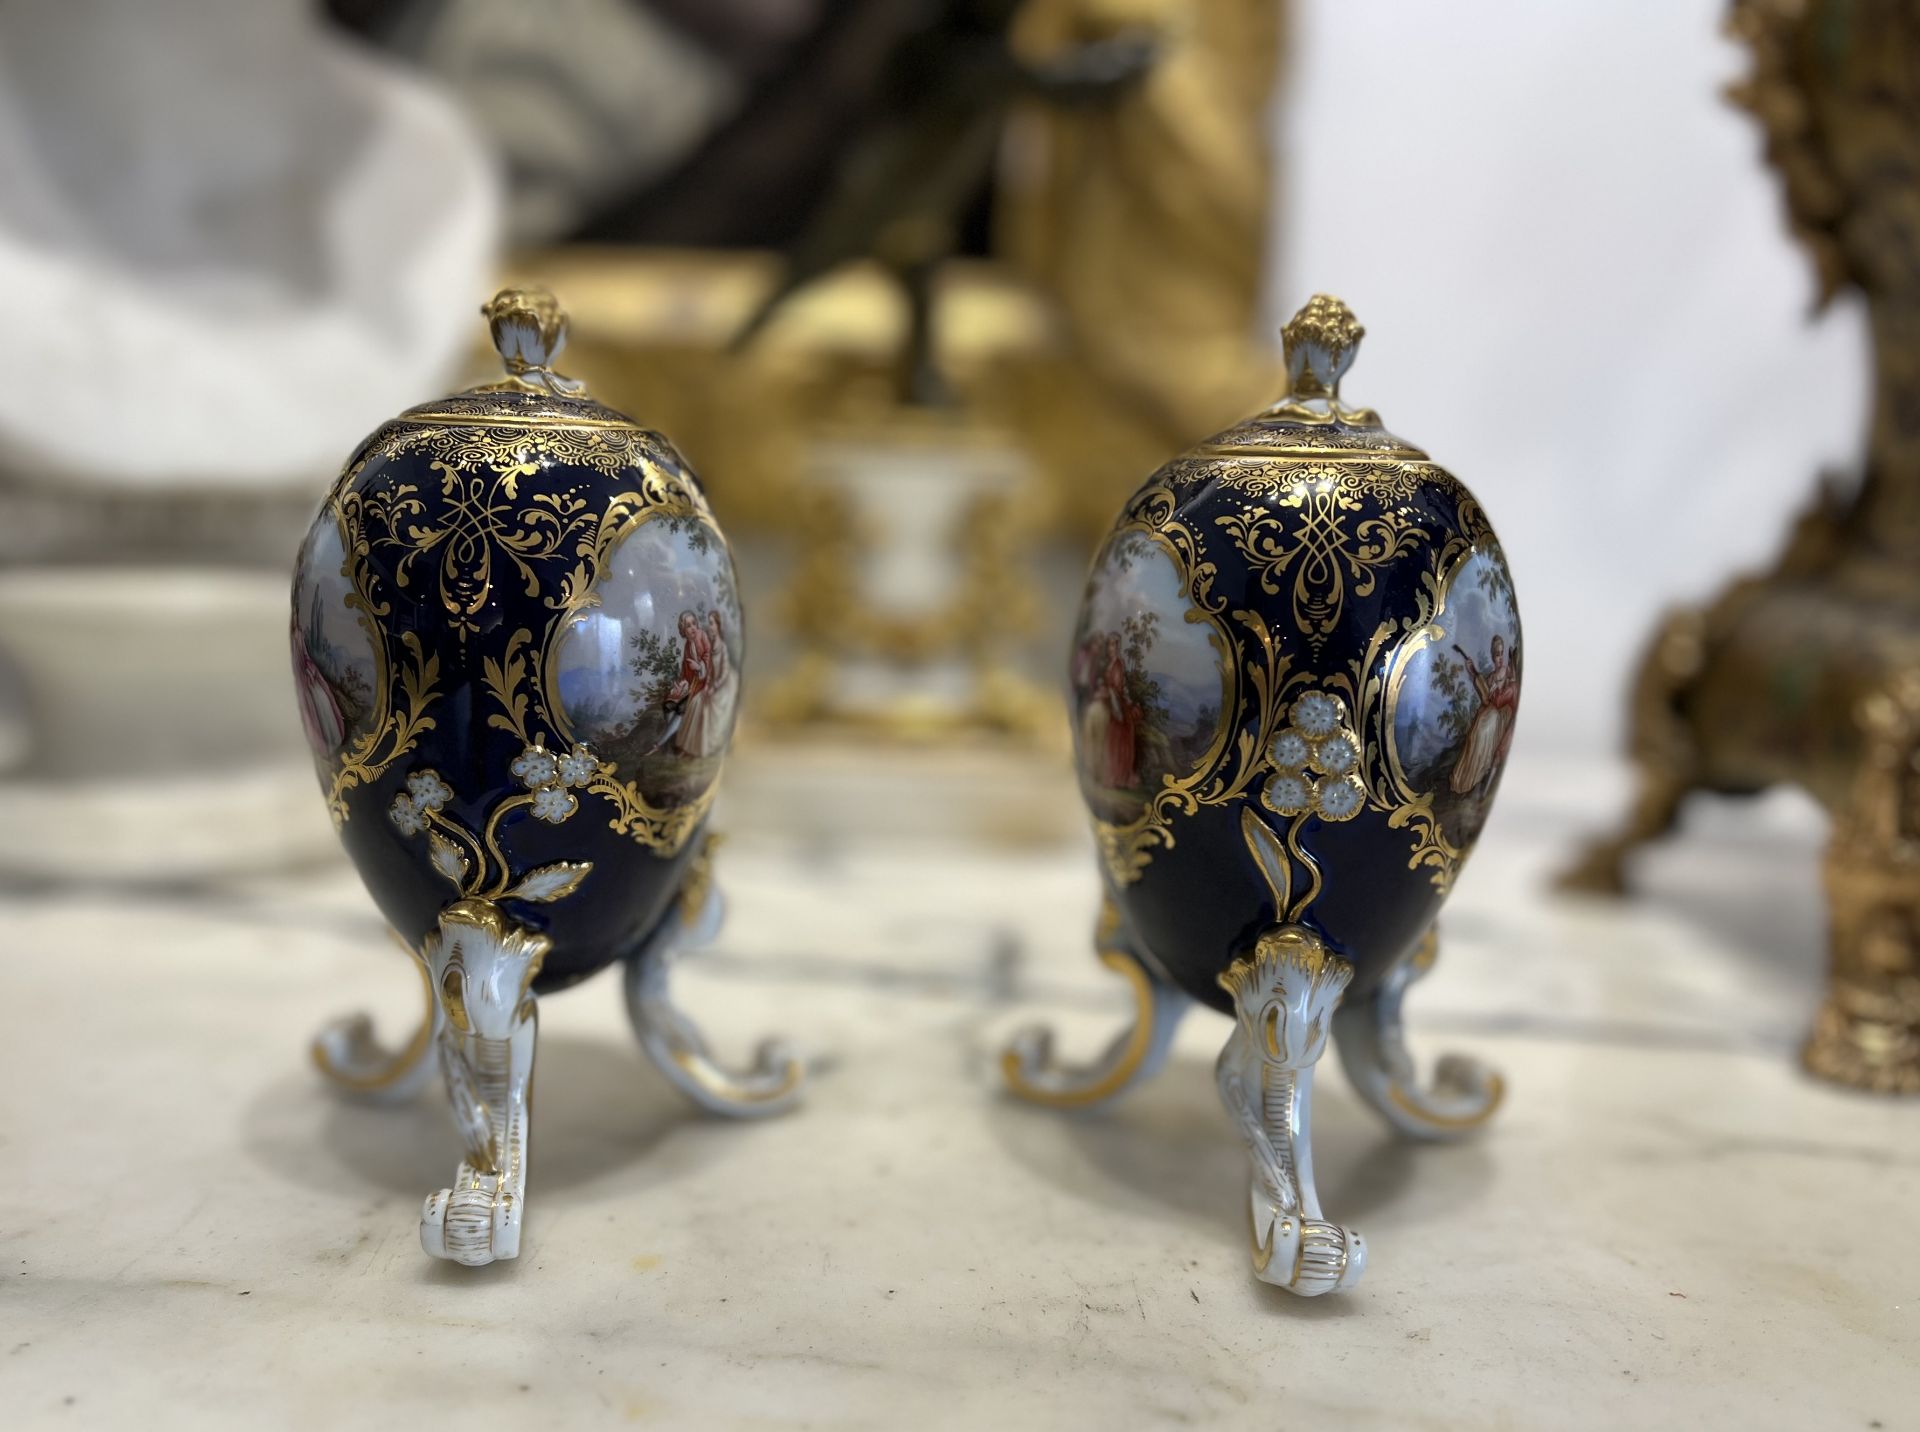 MEISSEN: A PAIR OF LATE 19TH / EARLY 20TH CENTURY PORCELAIN EGG SHAPED TEA CADDIES - Image 3 of 5